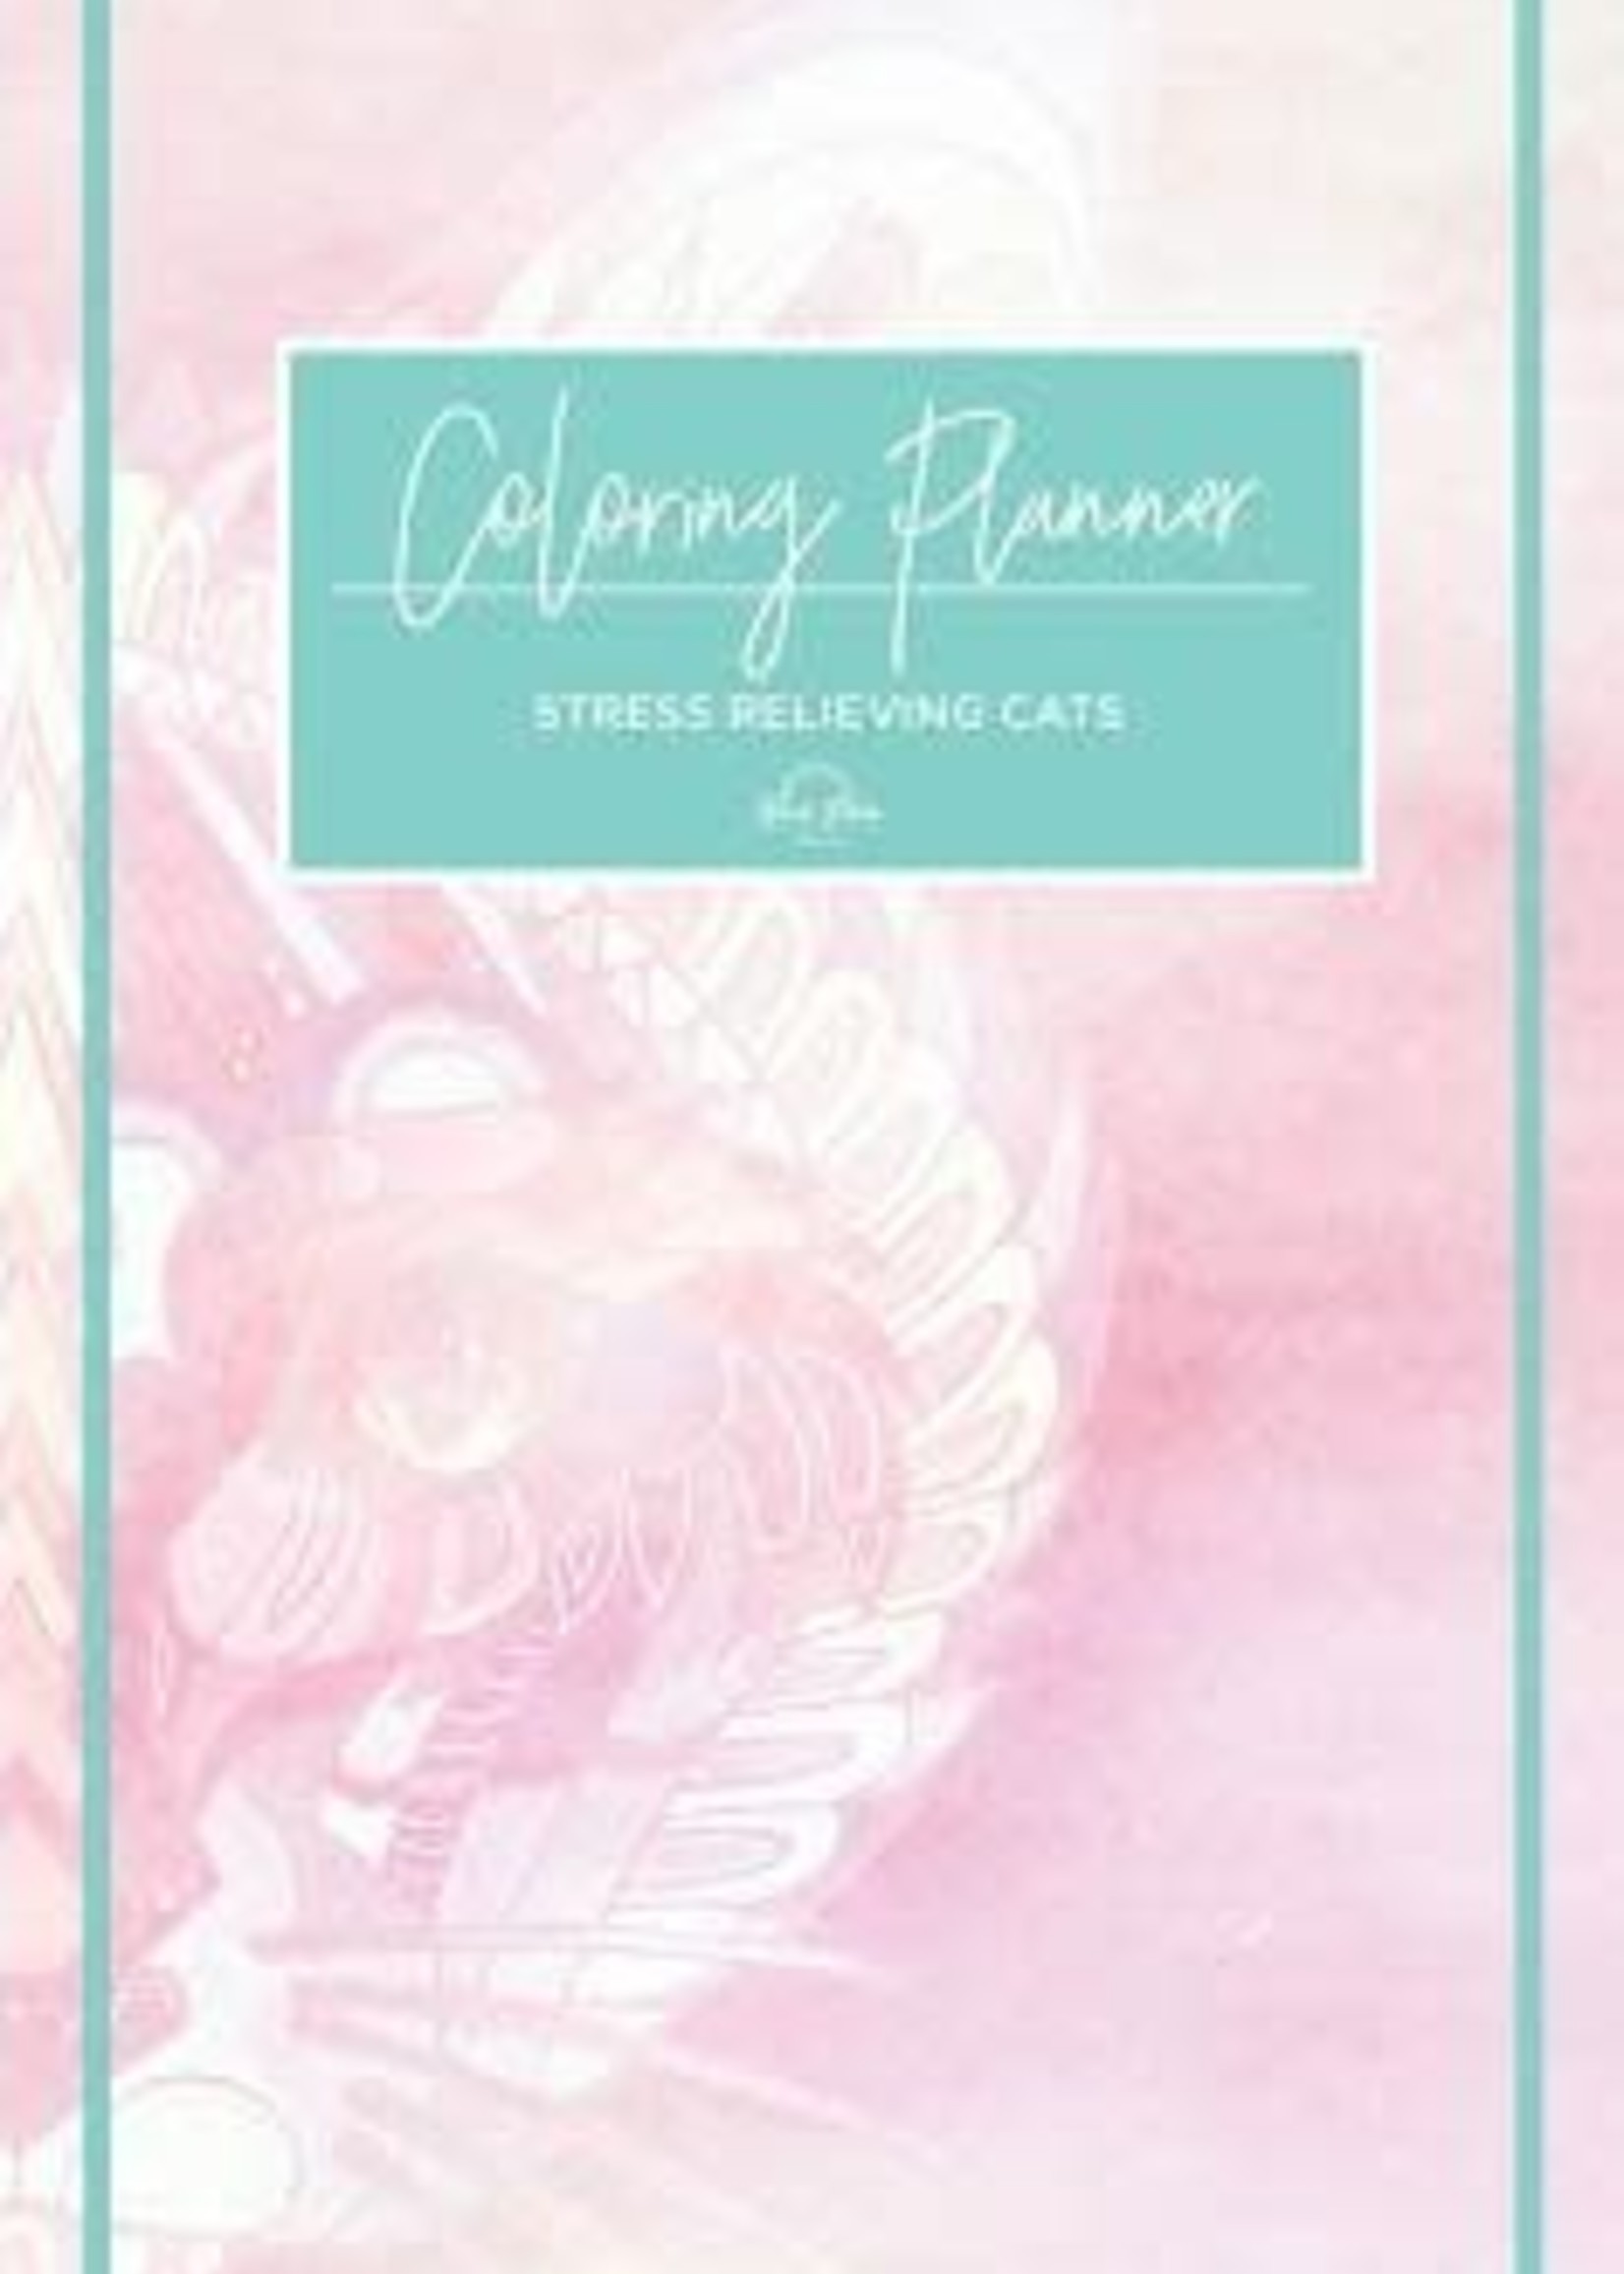 Coloring Planner: Stress Relieving Cats by Blue Star Press